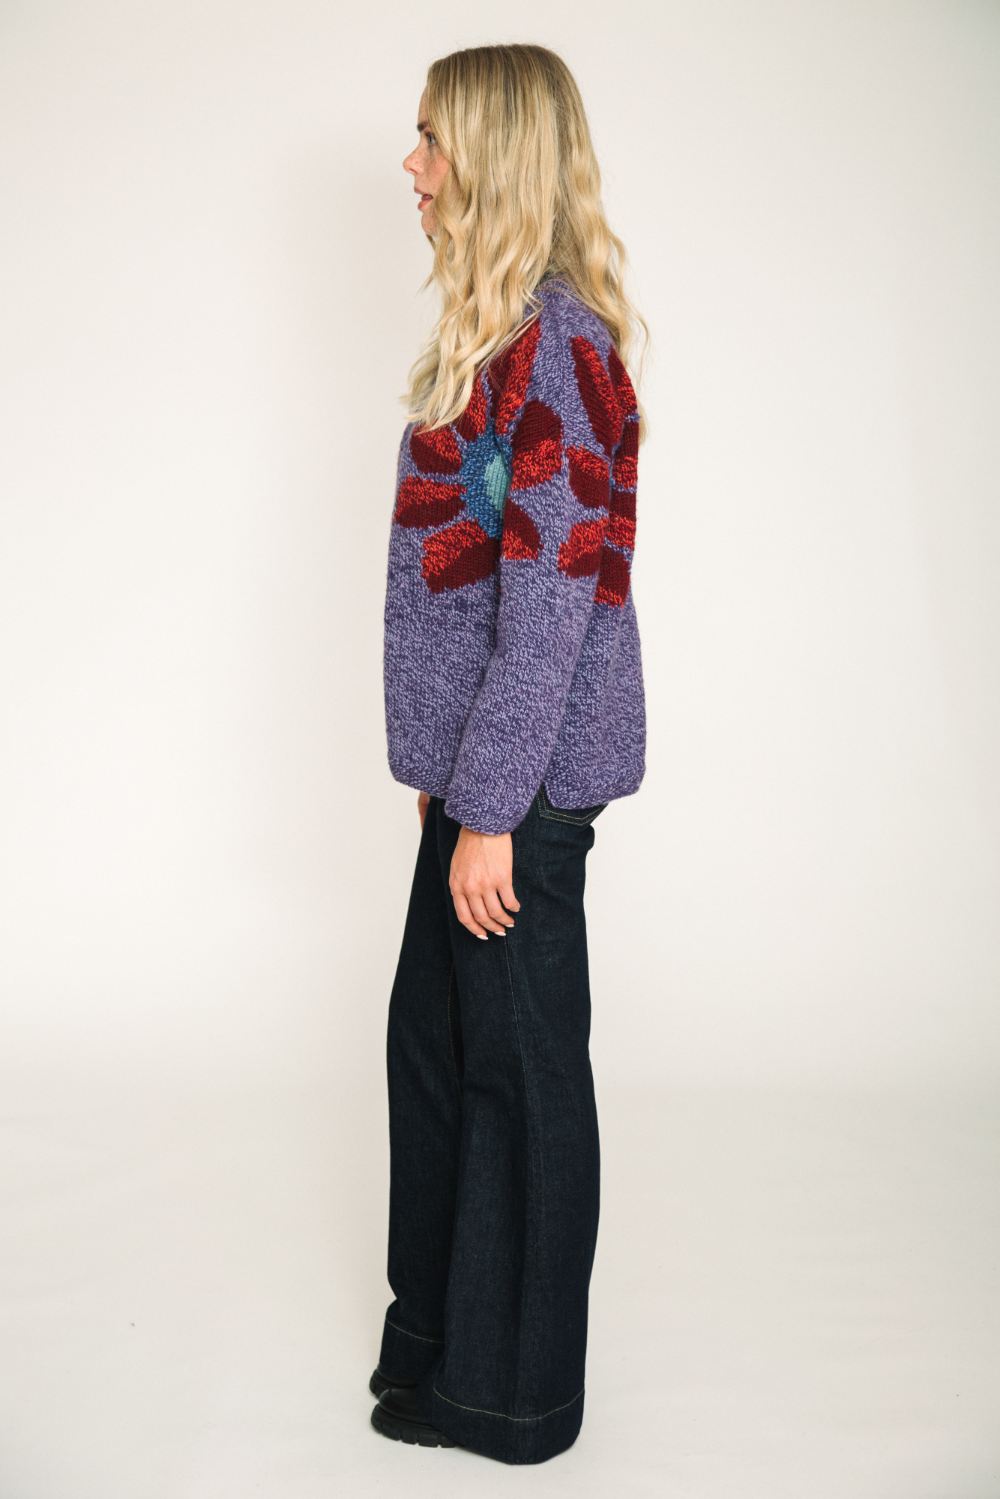 amano sunflower wool jumper in purple with red hand knit sweater